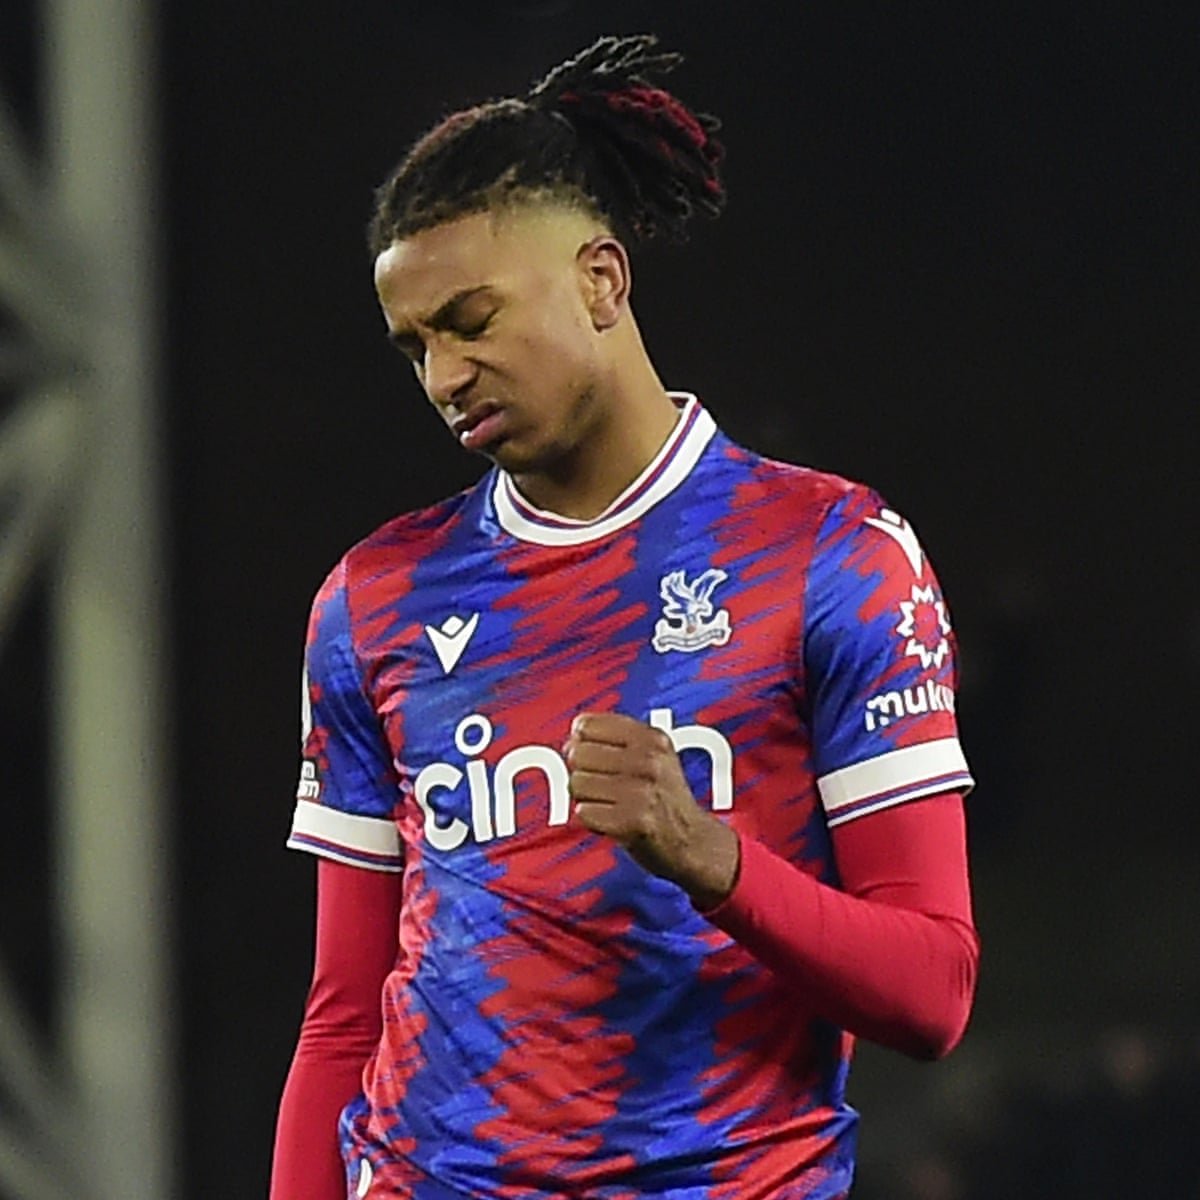 Football transfer rumours: PSG to move for Palace's Michael Olise?